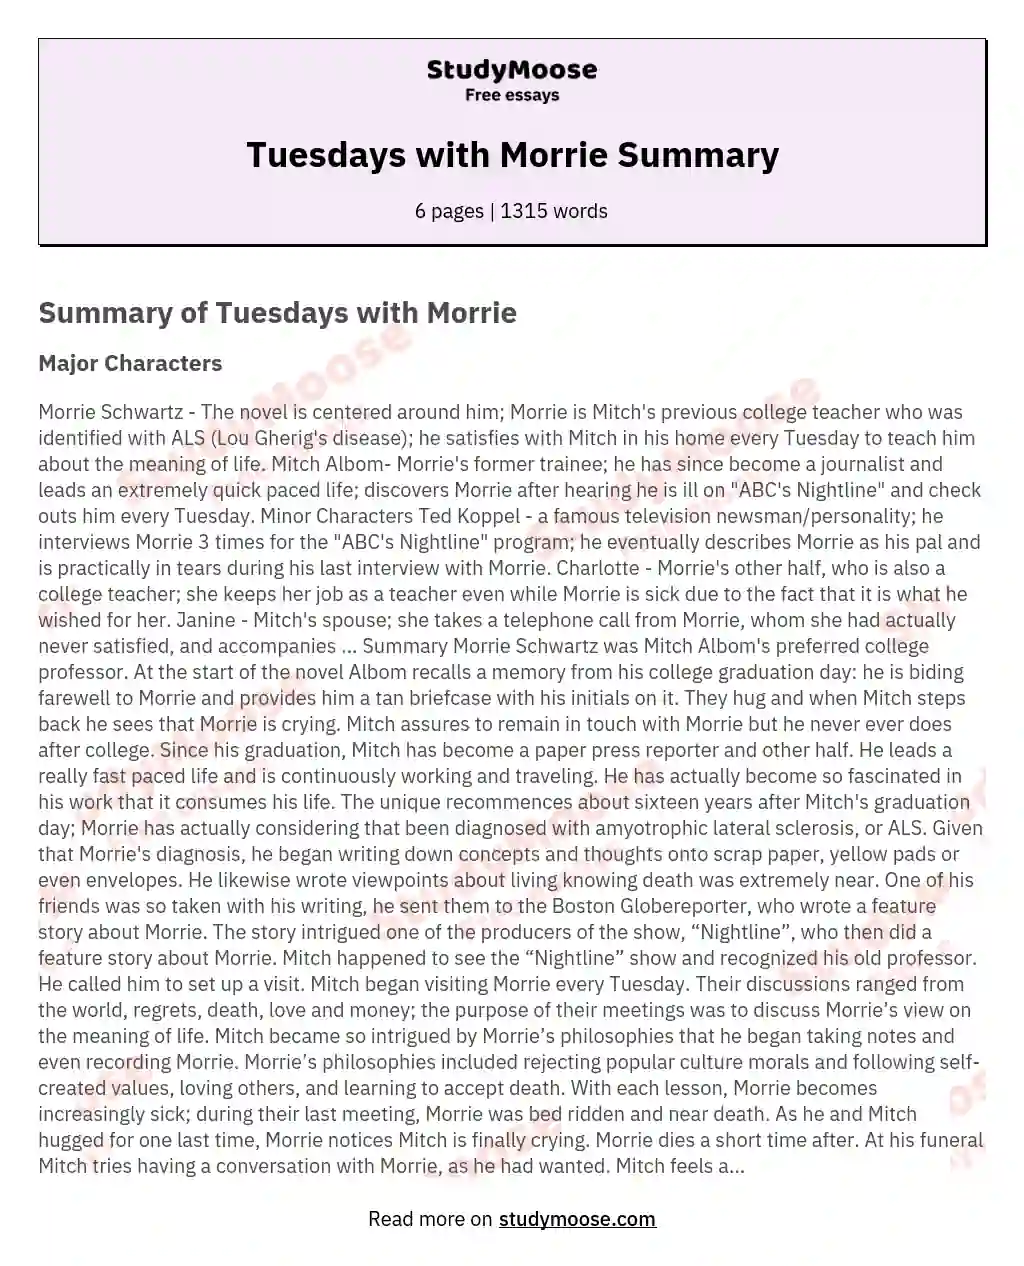 tuesday with morrie essay